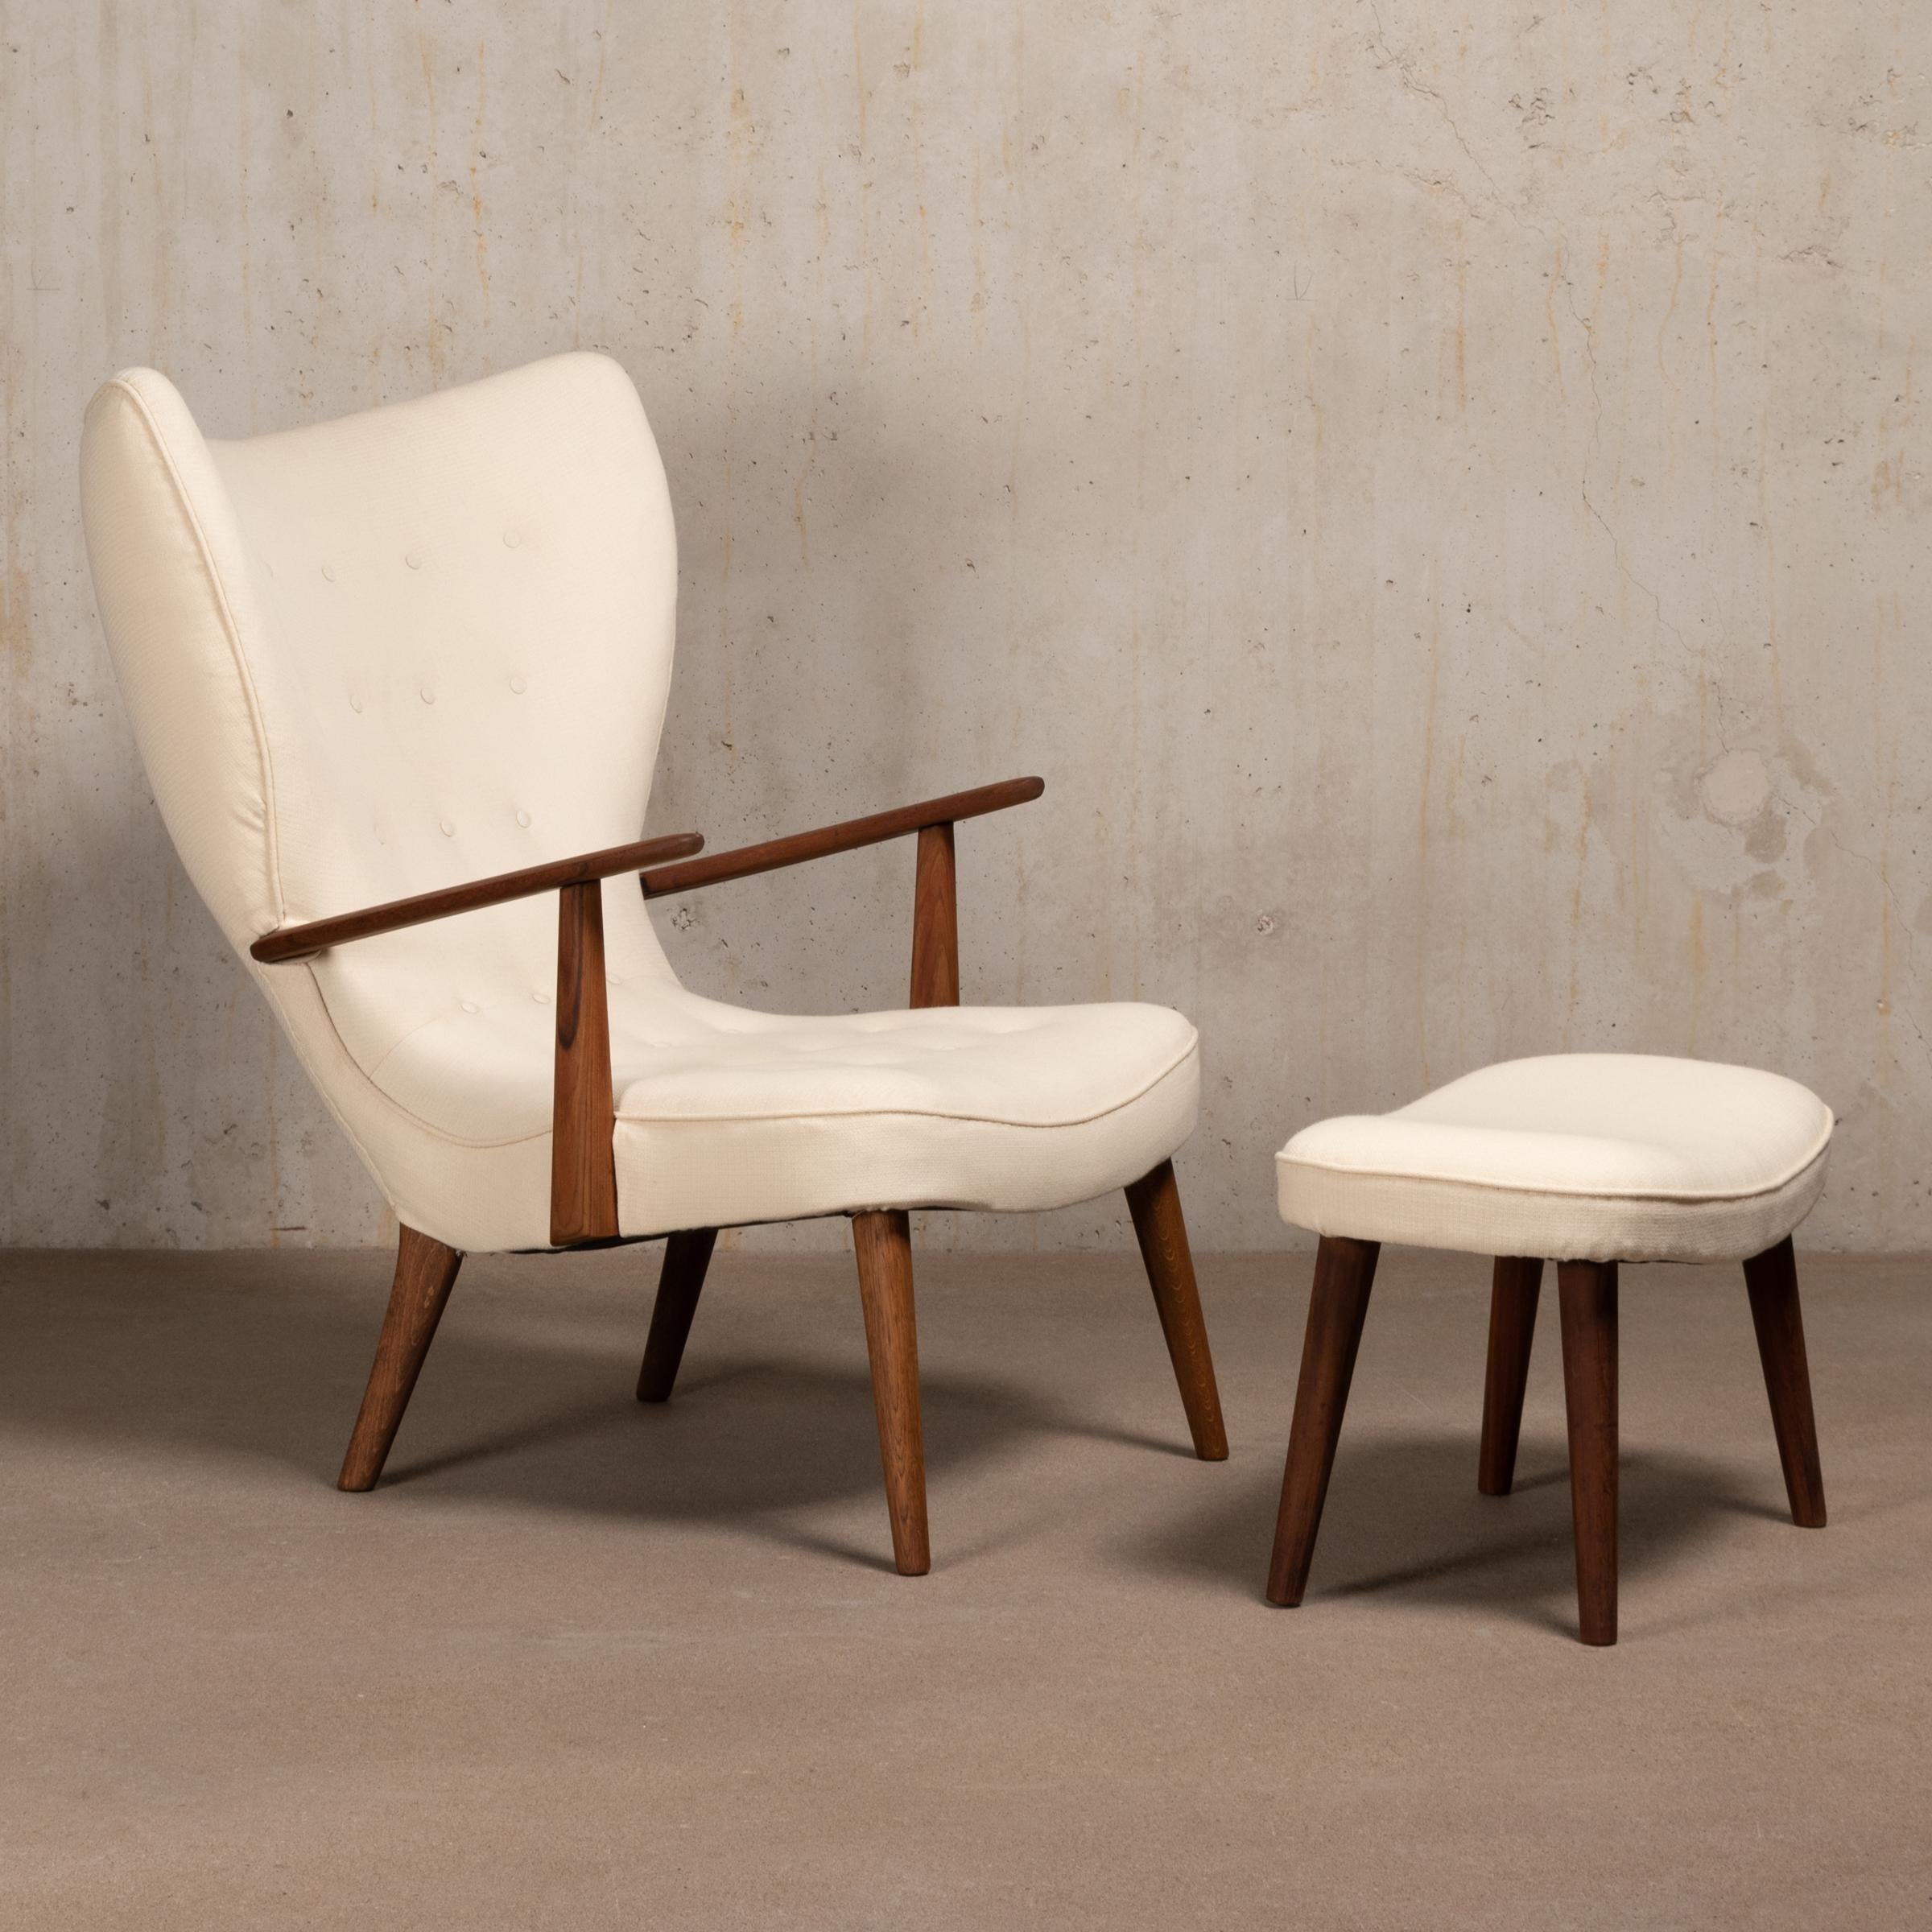 Famous sculptural and sensuous wingback / lounge 'Pragh' chair designed by Madsen & Schubell. Stained oak / beech and teak frame with light beige fabric. The upholstery is in good condition with light staining, though the chair would benefit with a